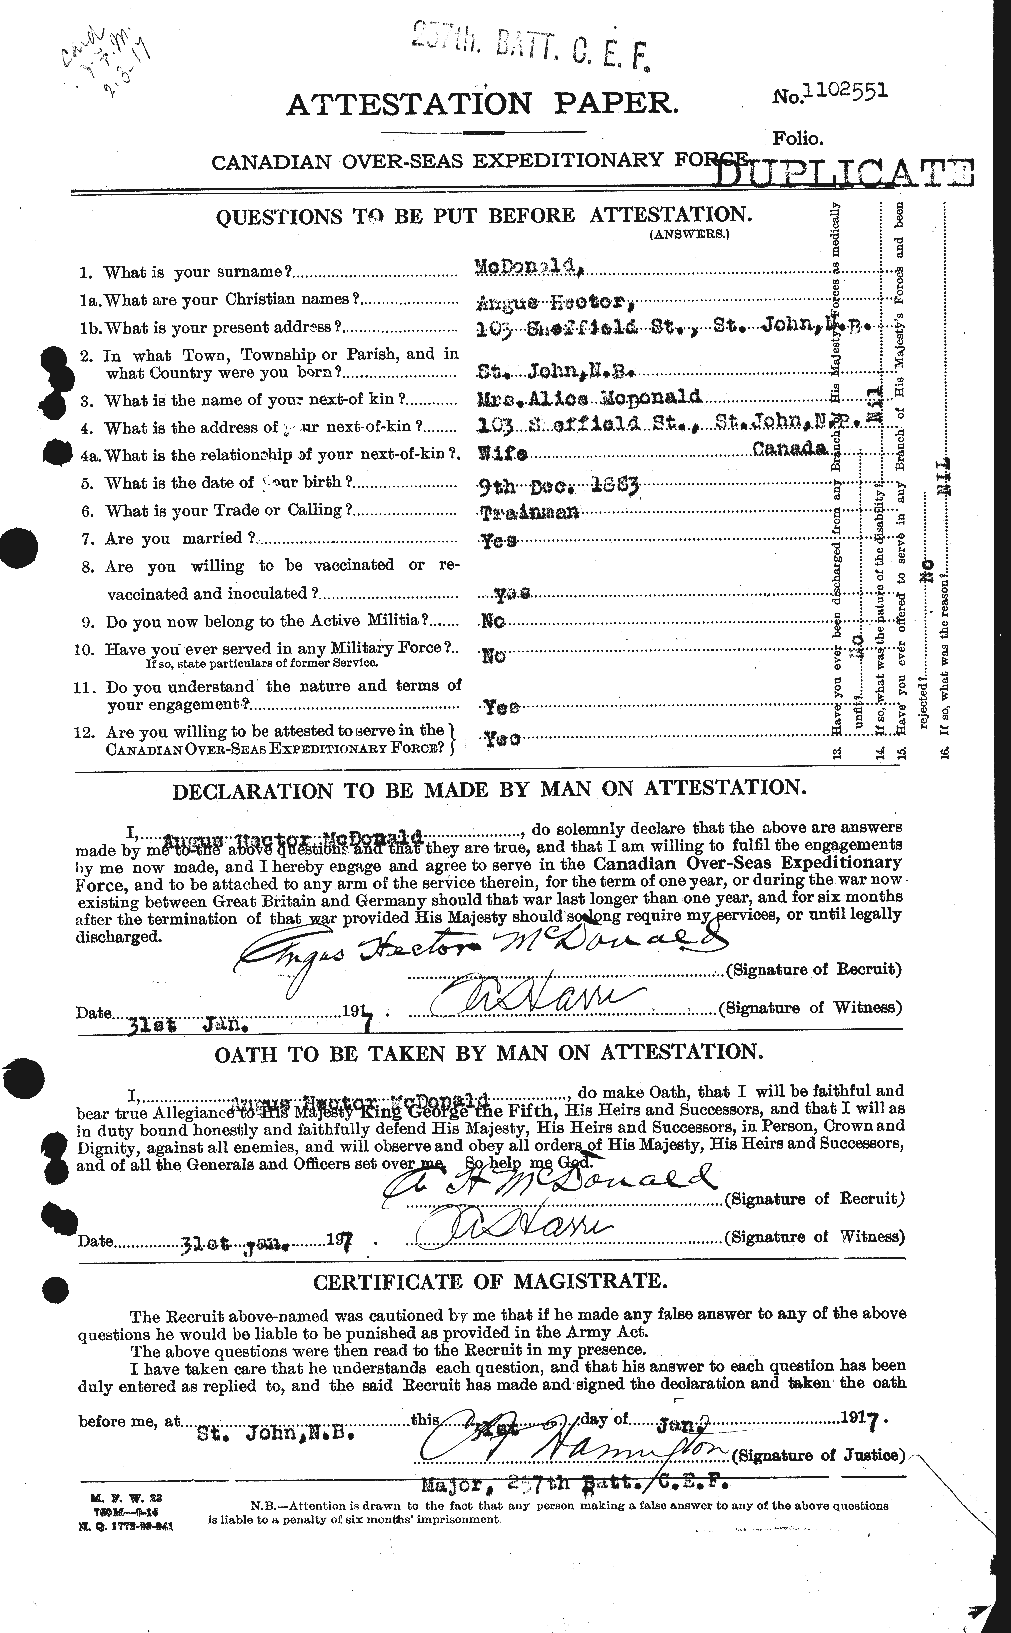 Personnel Records of the First World War - CEF 137111a